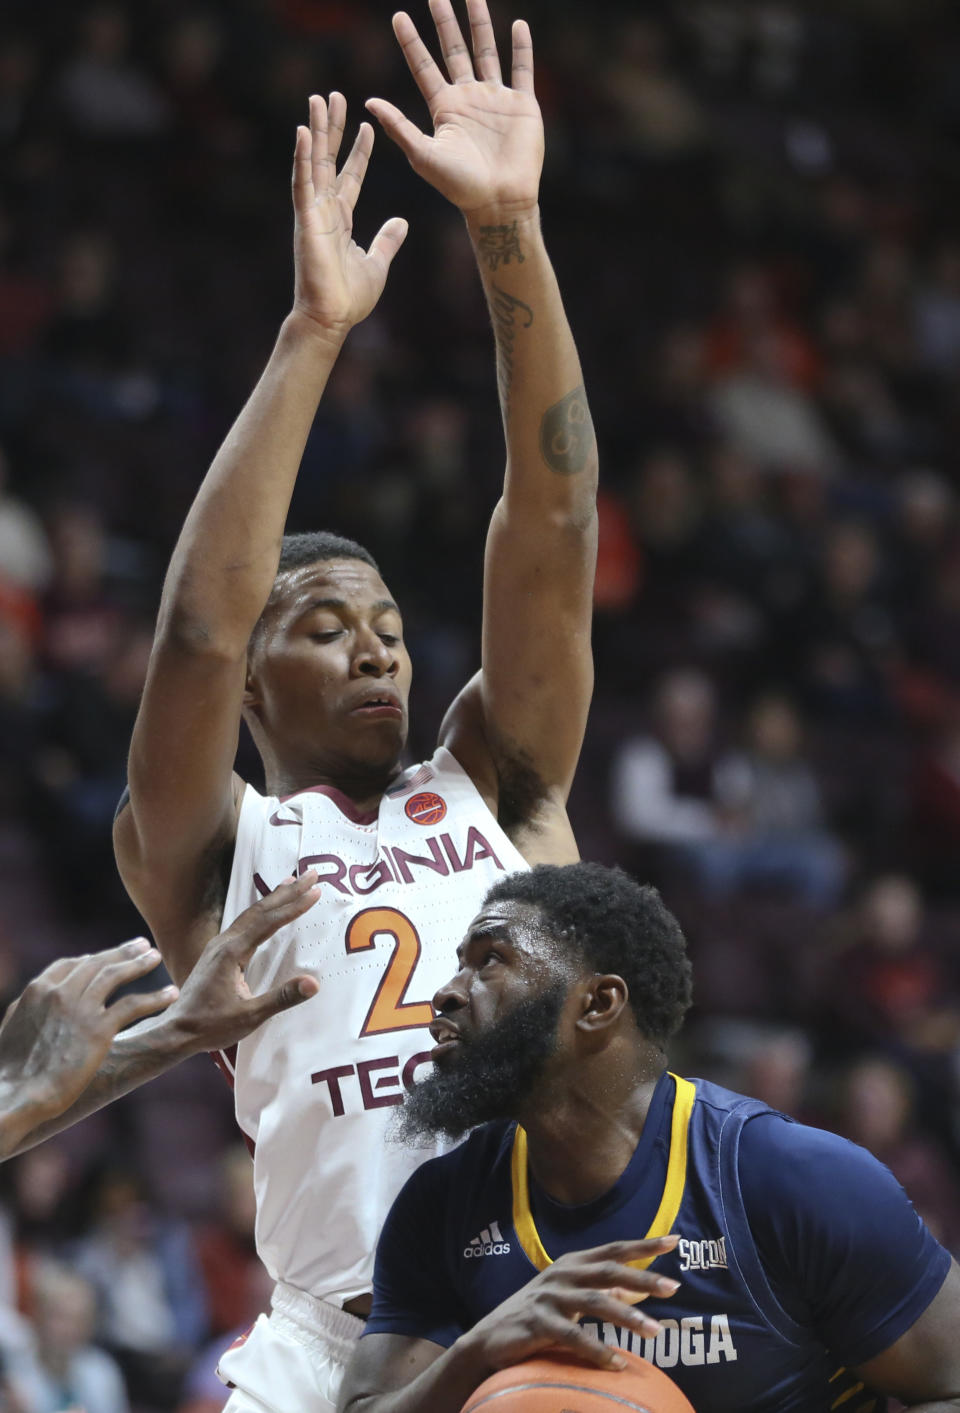 Chattanooga's David Jean-Baptiste, foreground, looks to shoot while guarded by Virginia Tech's Landers Nolley II (2) in the first half of an NCAA college basketball game, Wednesday, Dec. 11, 2019, in Blacksburg, Va. (Matt Gentry/The Roanoke Times via AP)